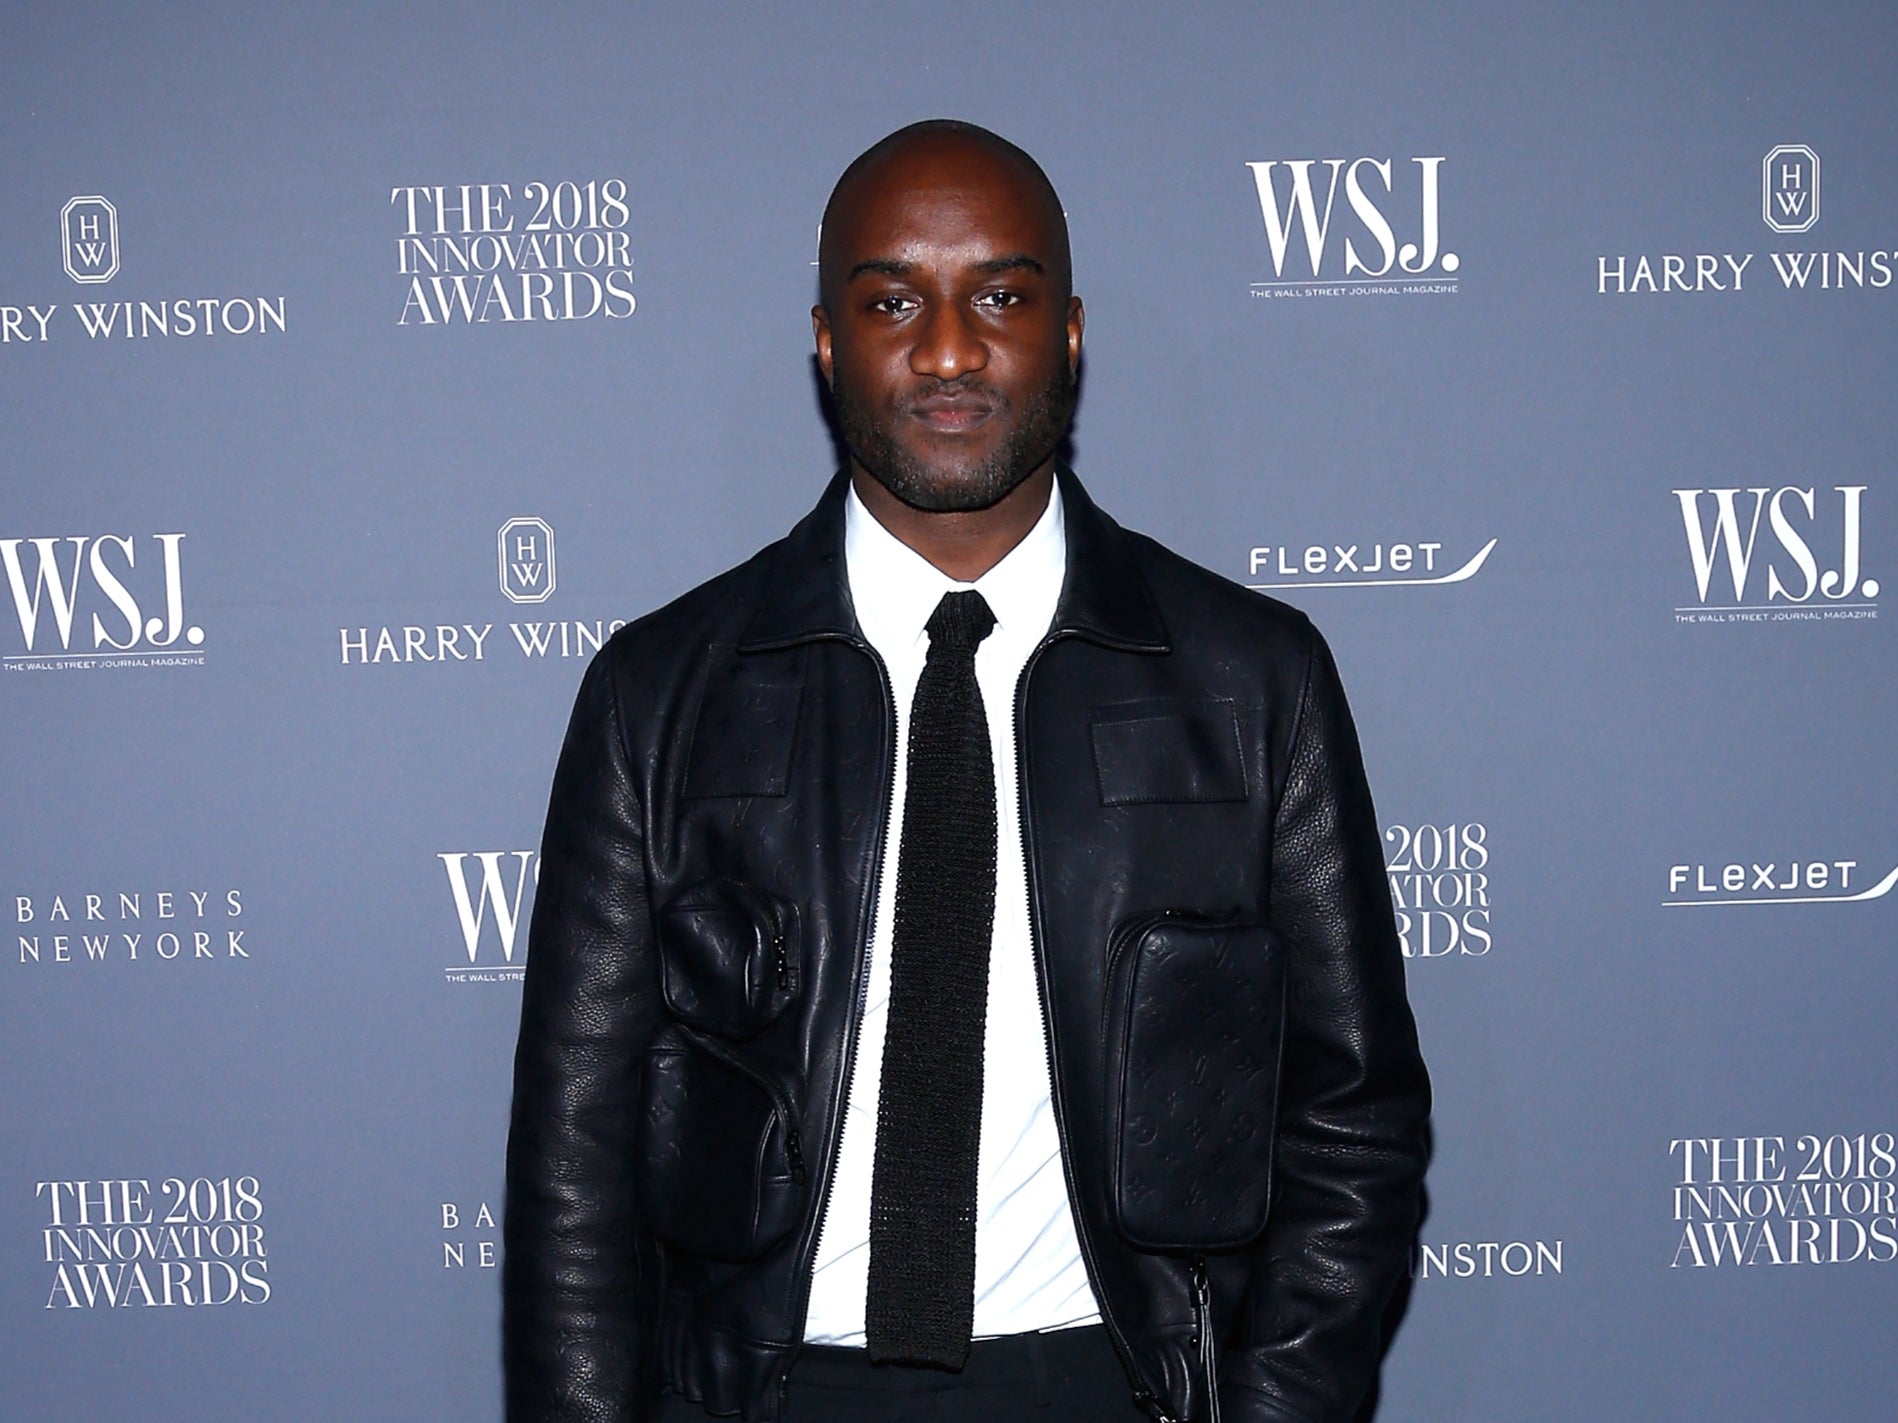 Virgil Abloh, fashion designer known for work with Louis Vuitton